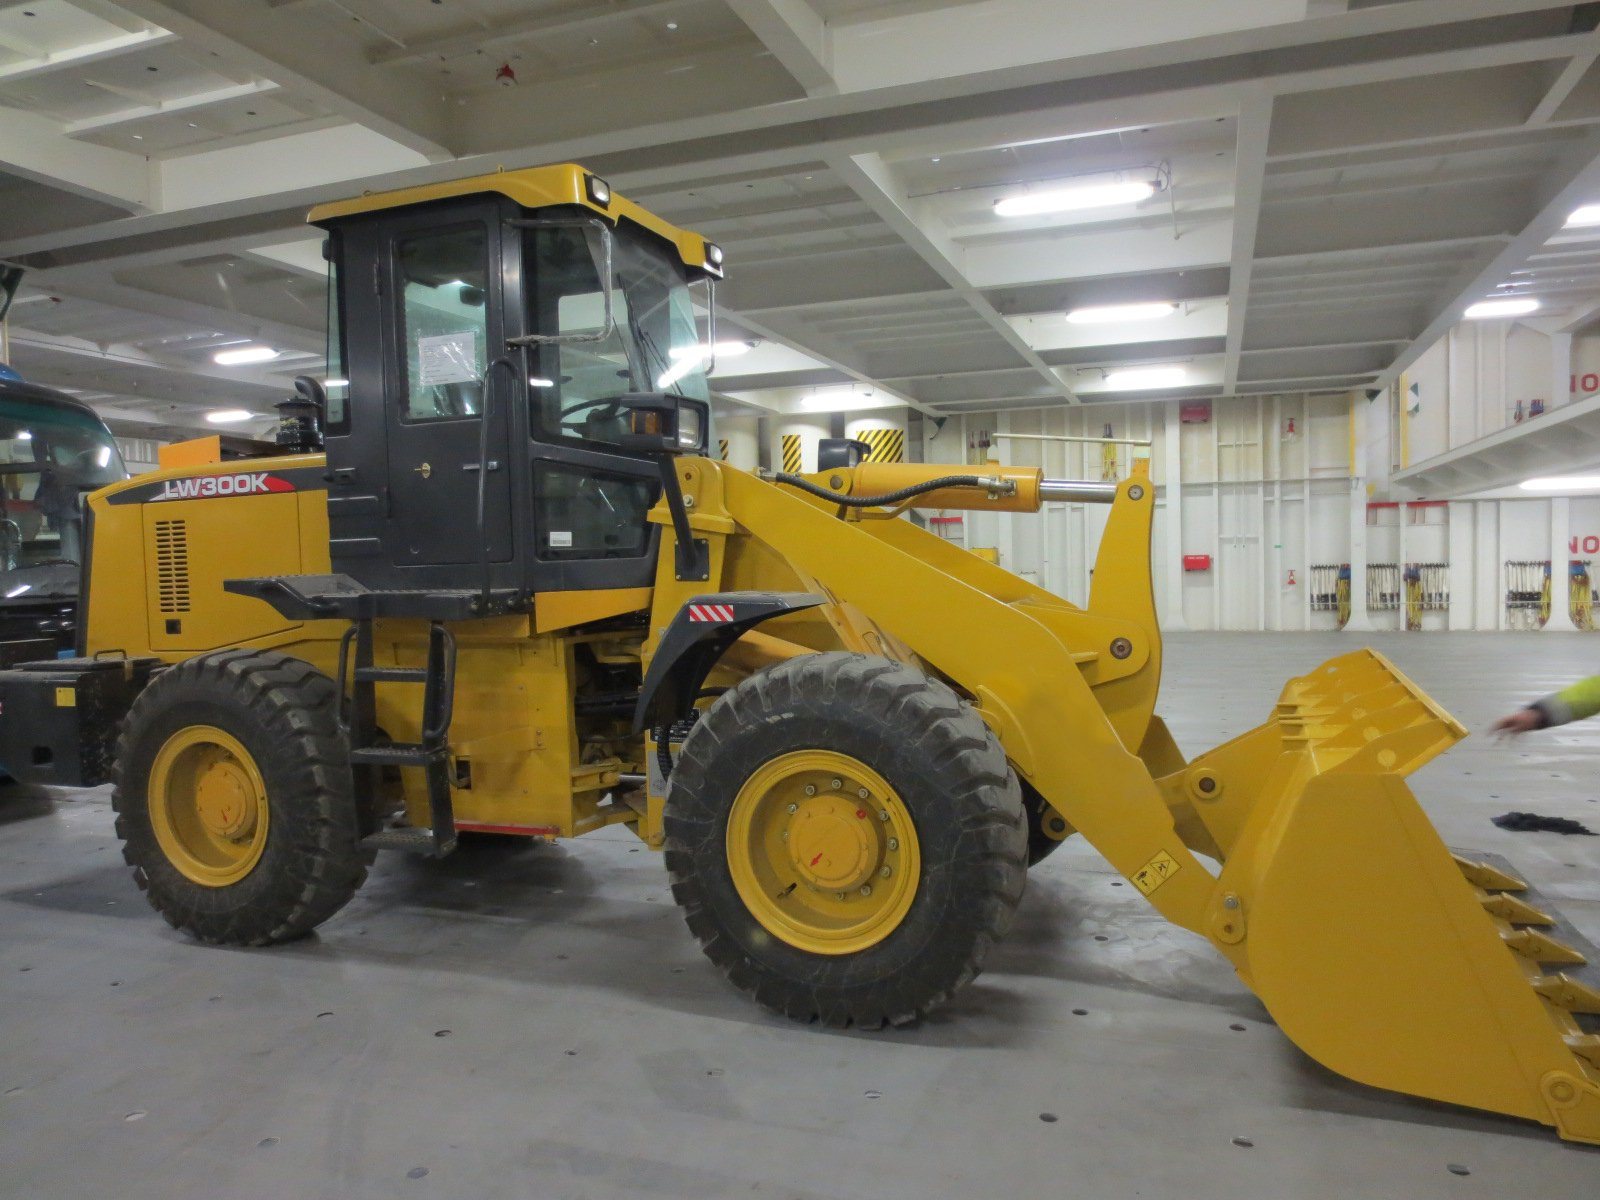 3.5 Ton New Wheel Loader Lw350kn with High Quality for Sale